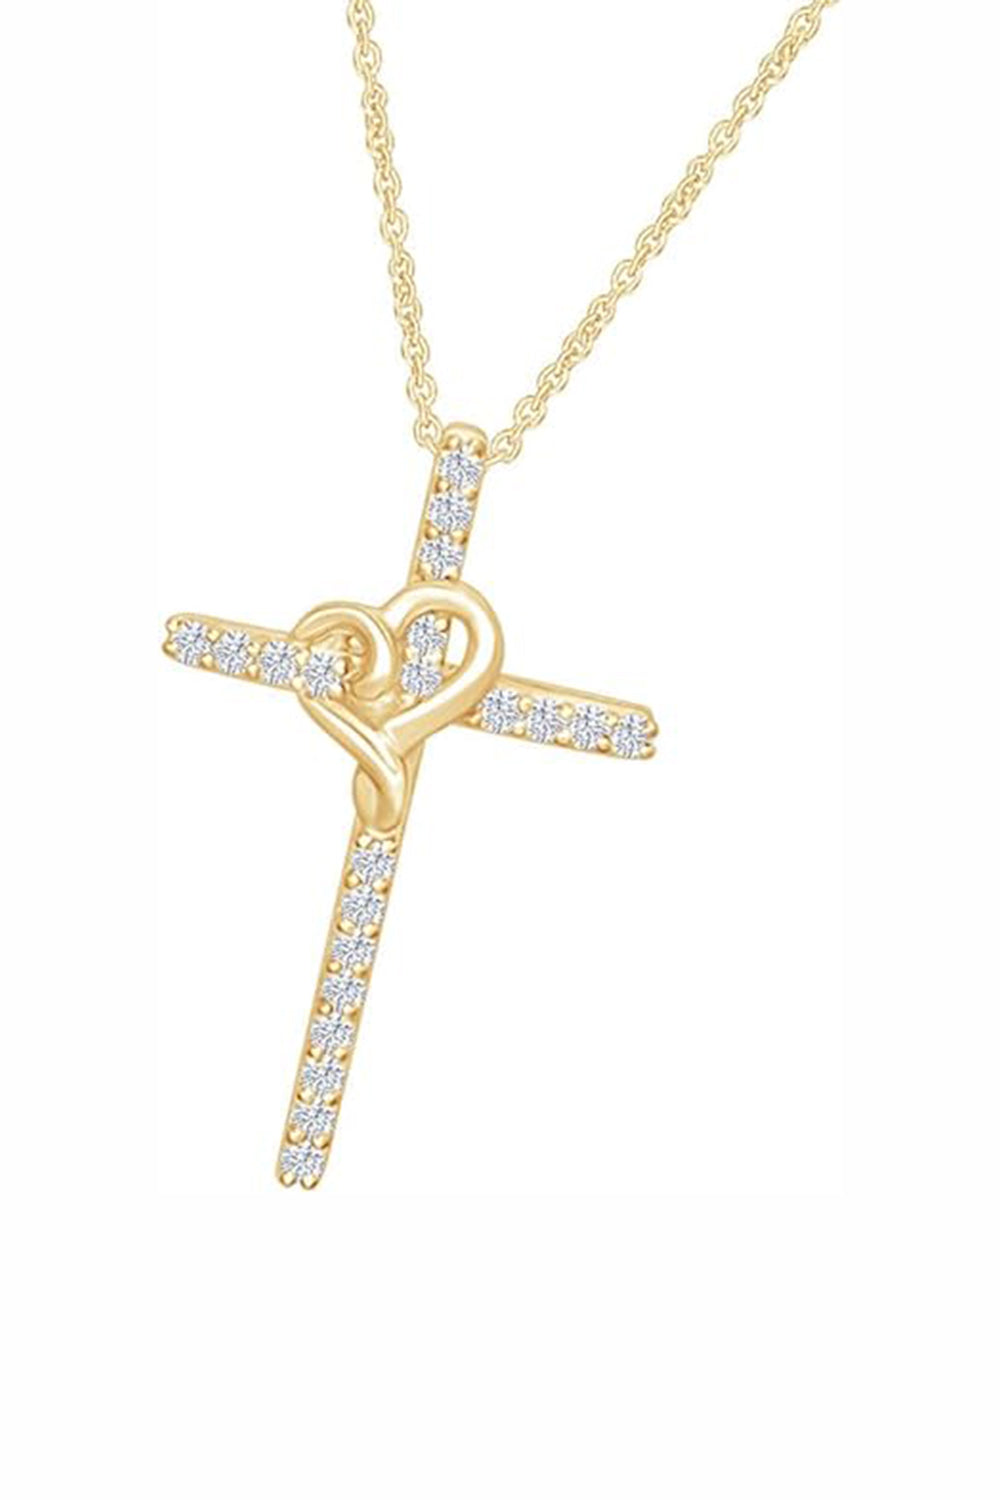 Yellow Gold Color Yaathi Heart Cross Pendant Necklace, Religious Pendant